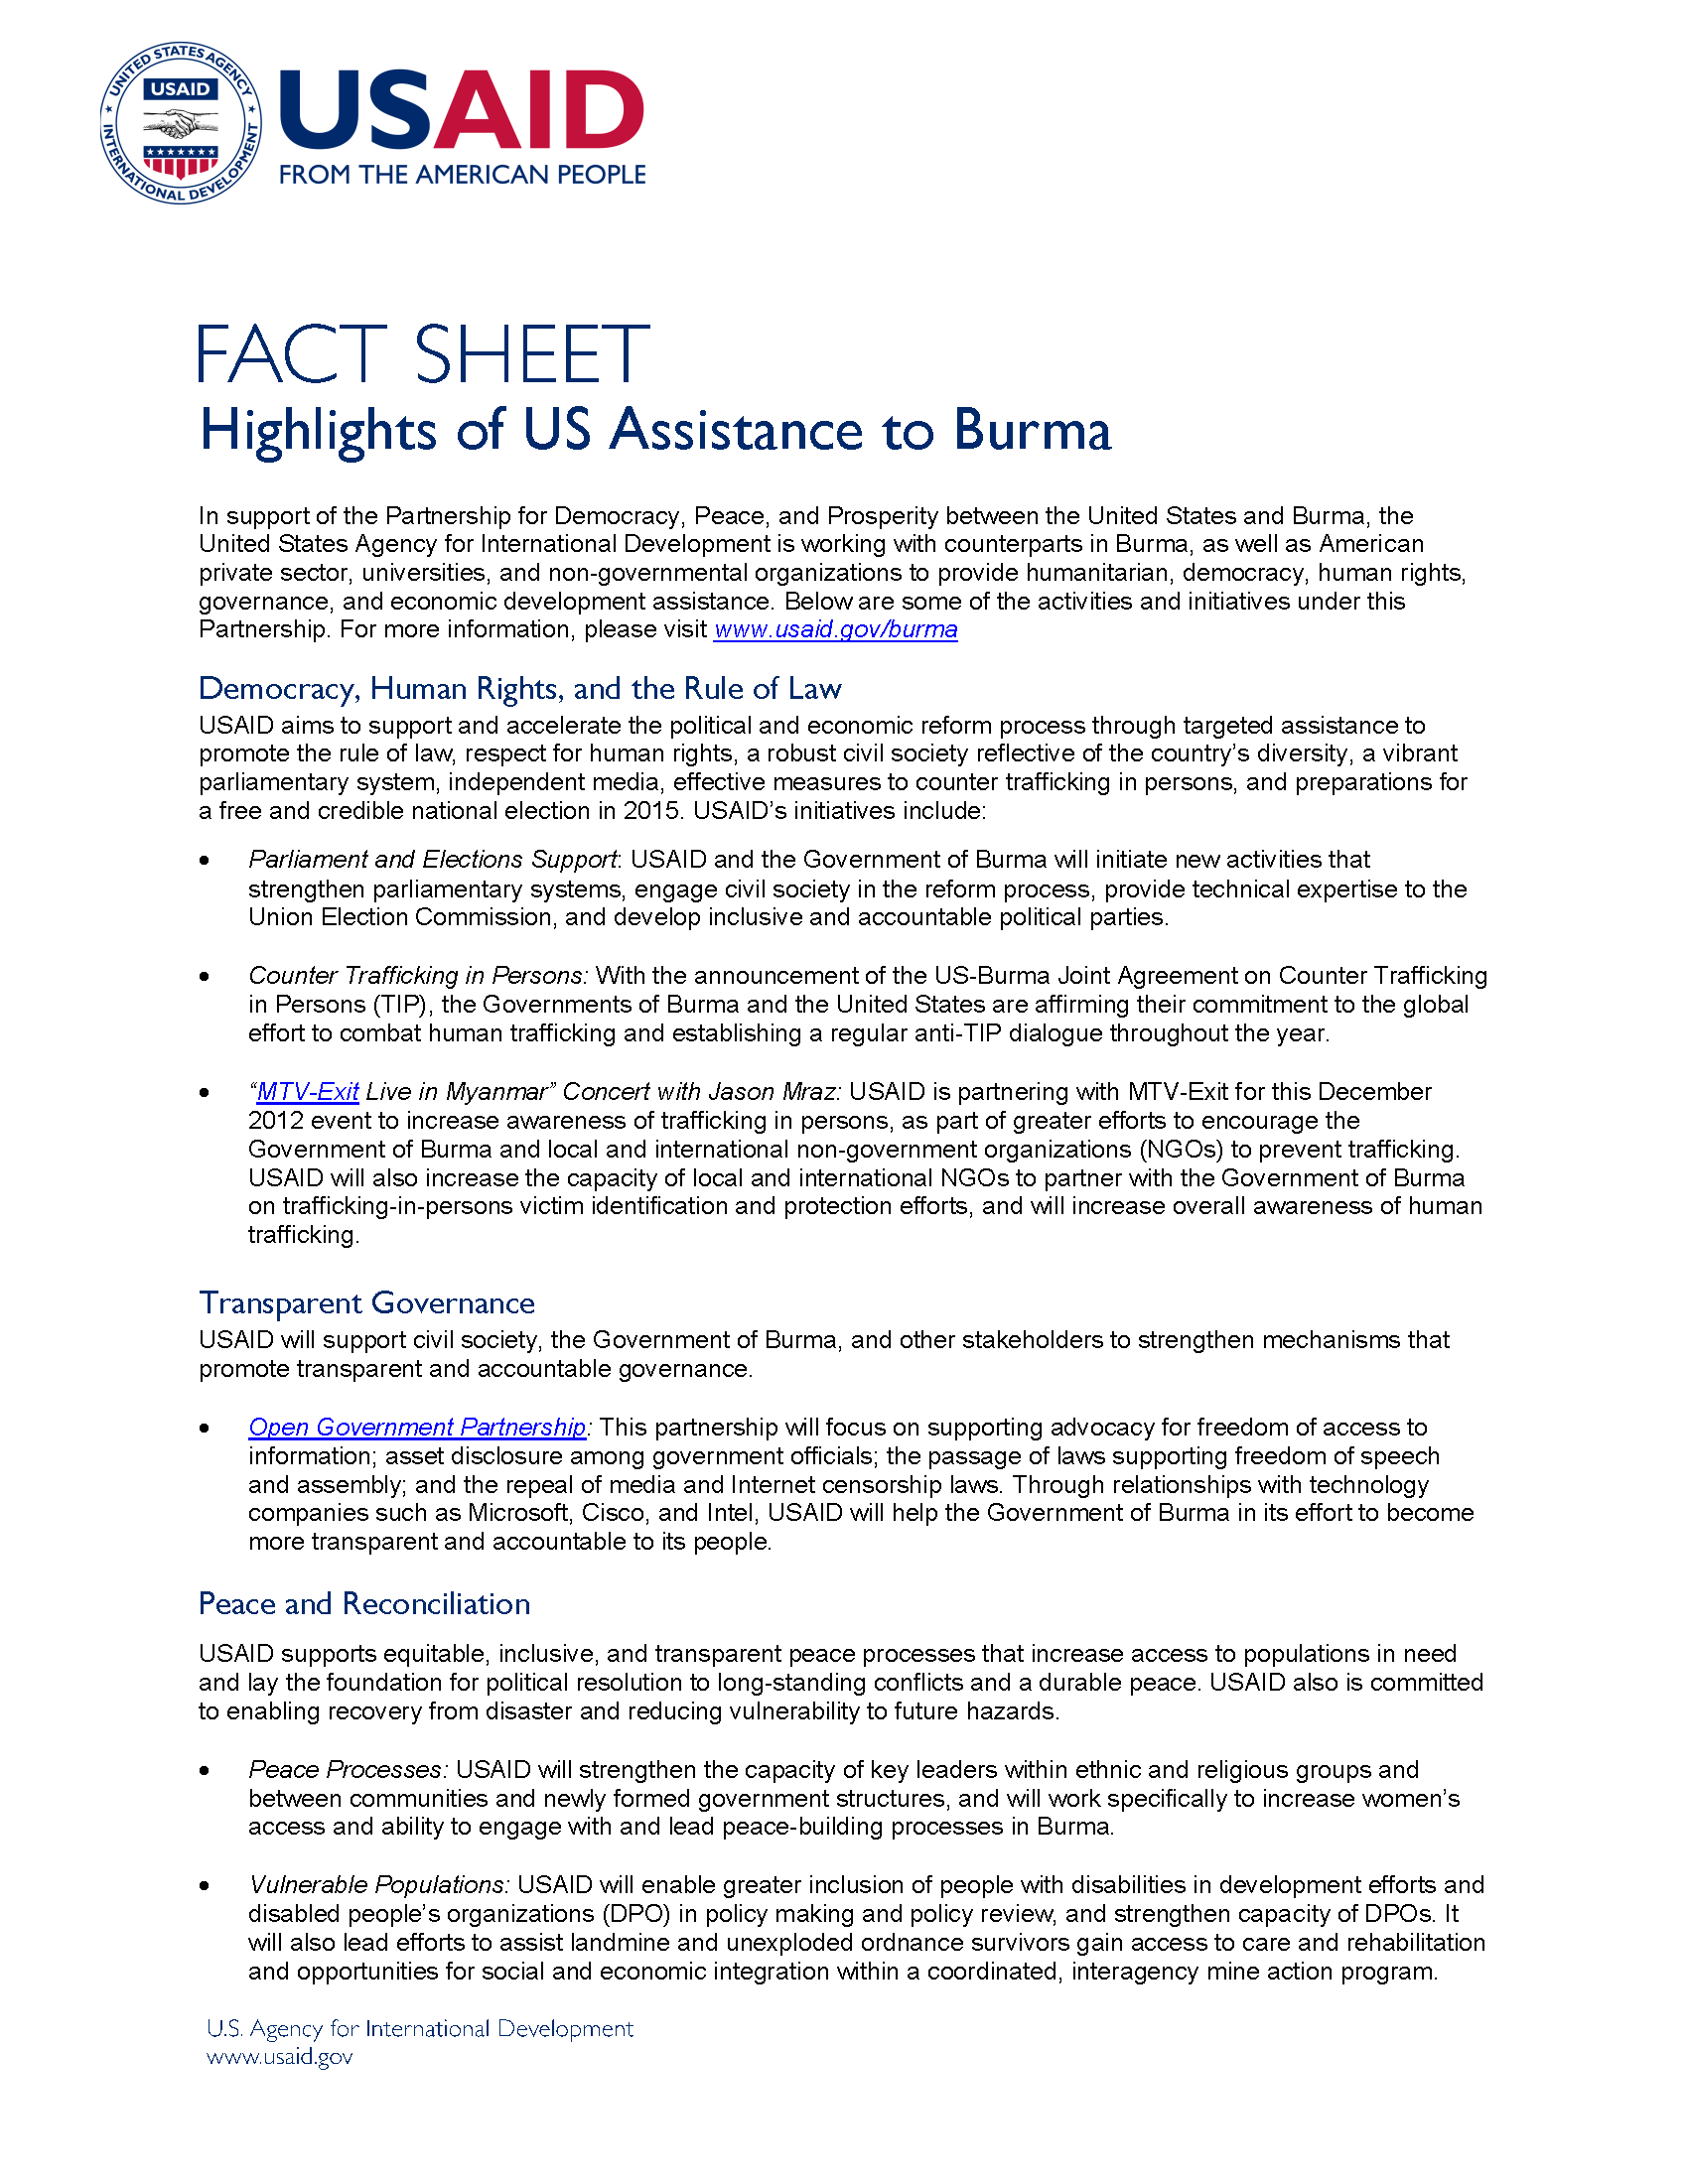 Highlights of USAID Assistance to Burma Fact Sheet